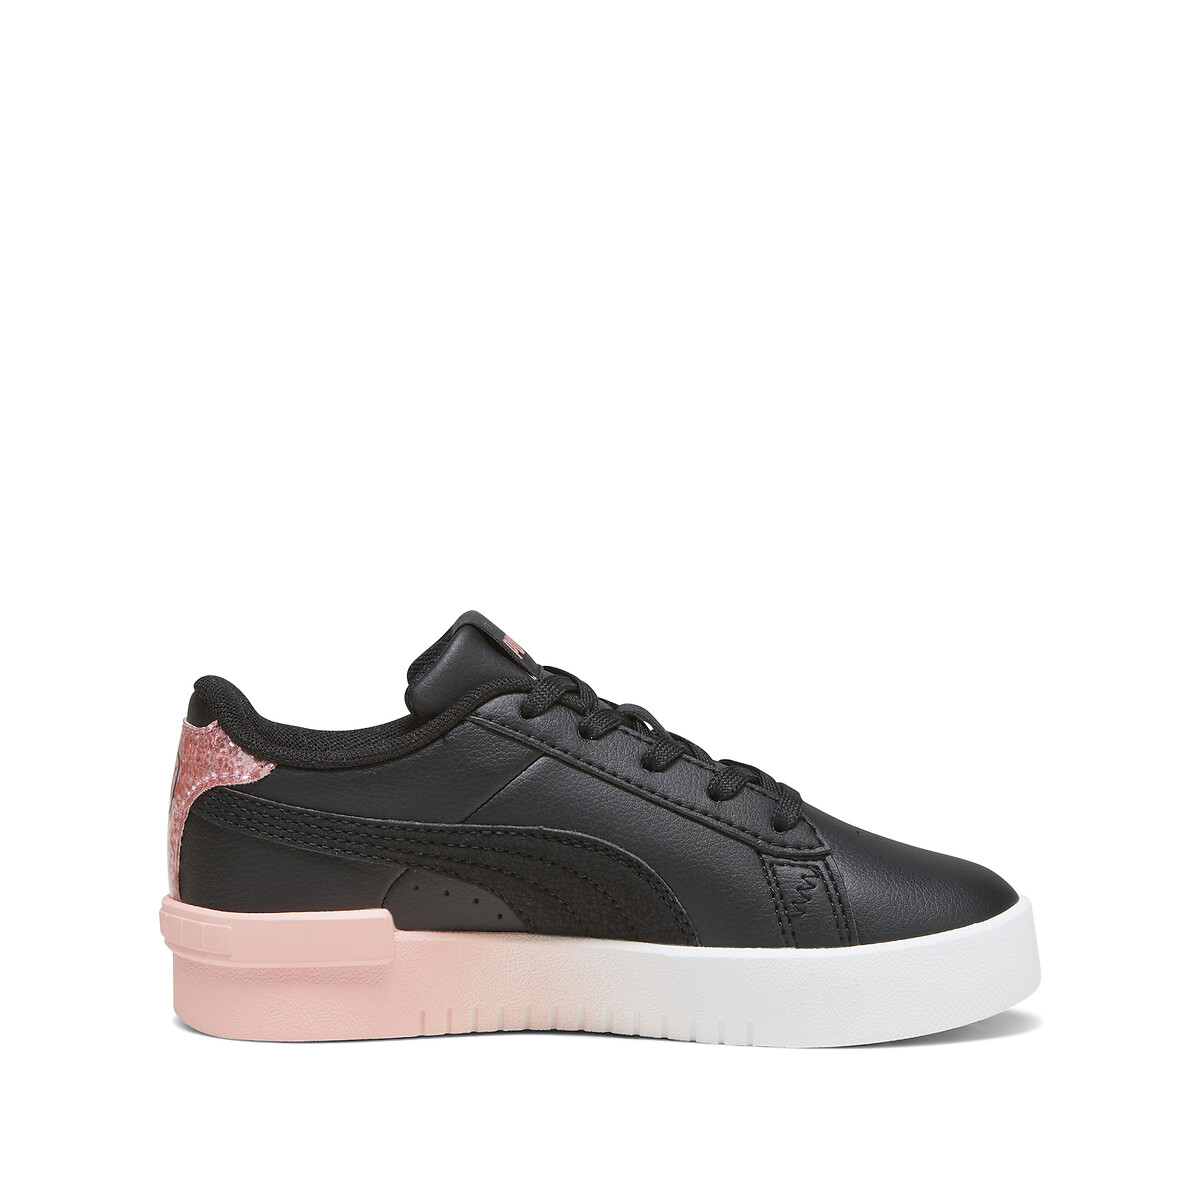 Image of Kids Jada Star Glow Trainers in Leather